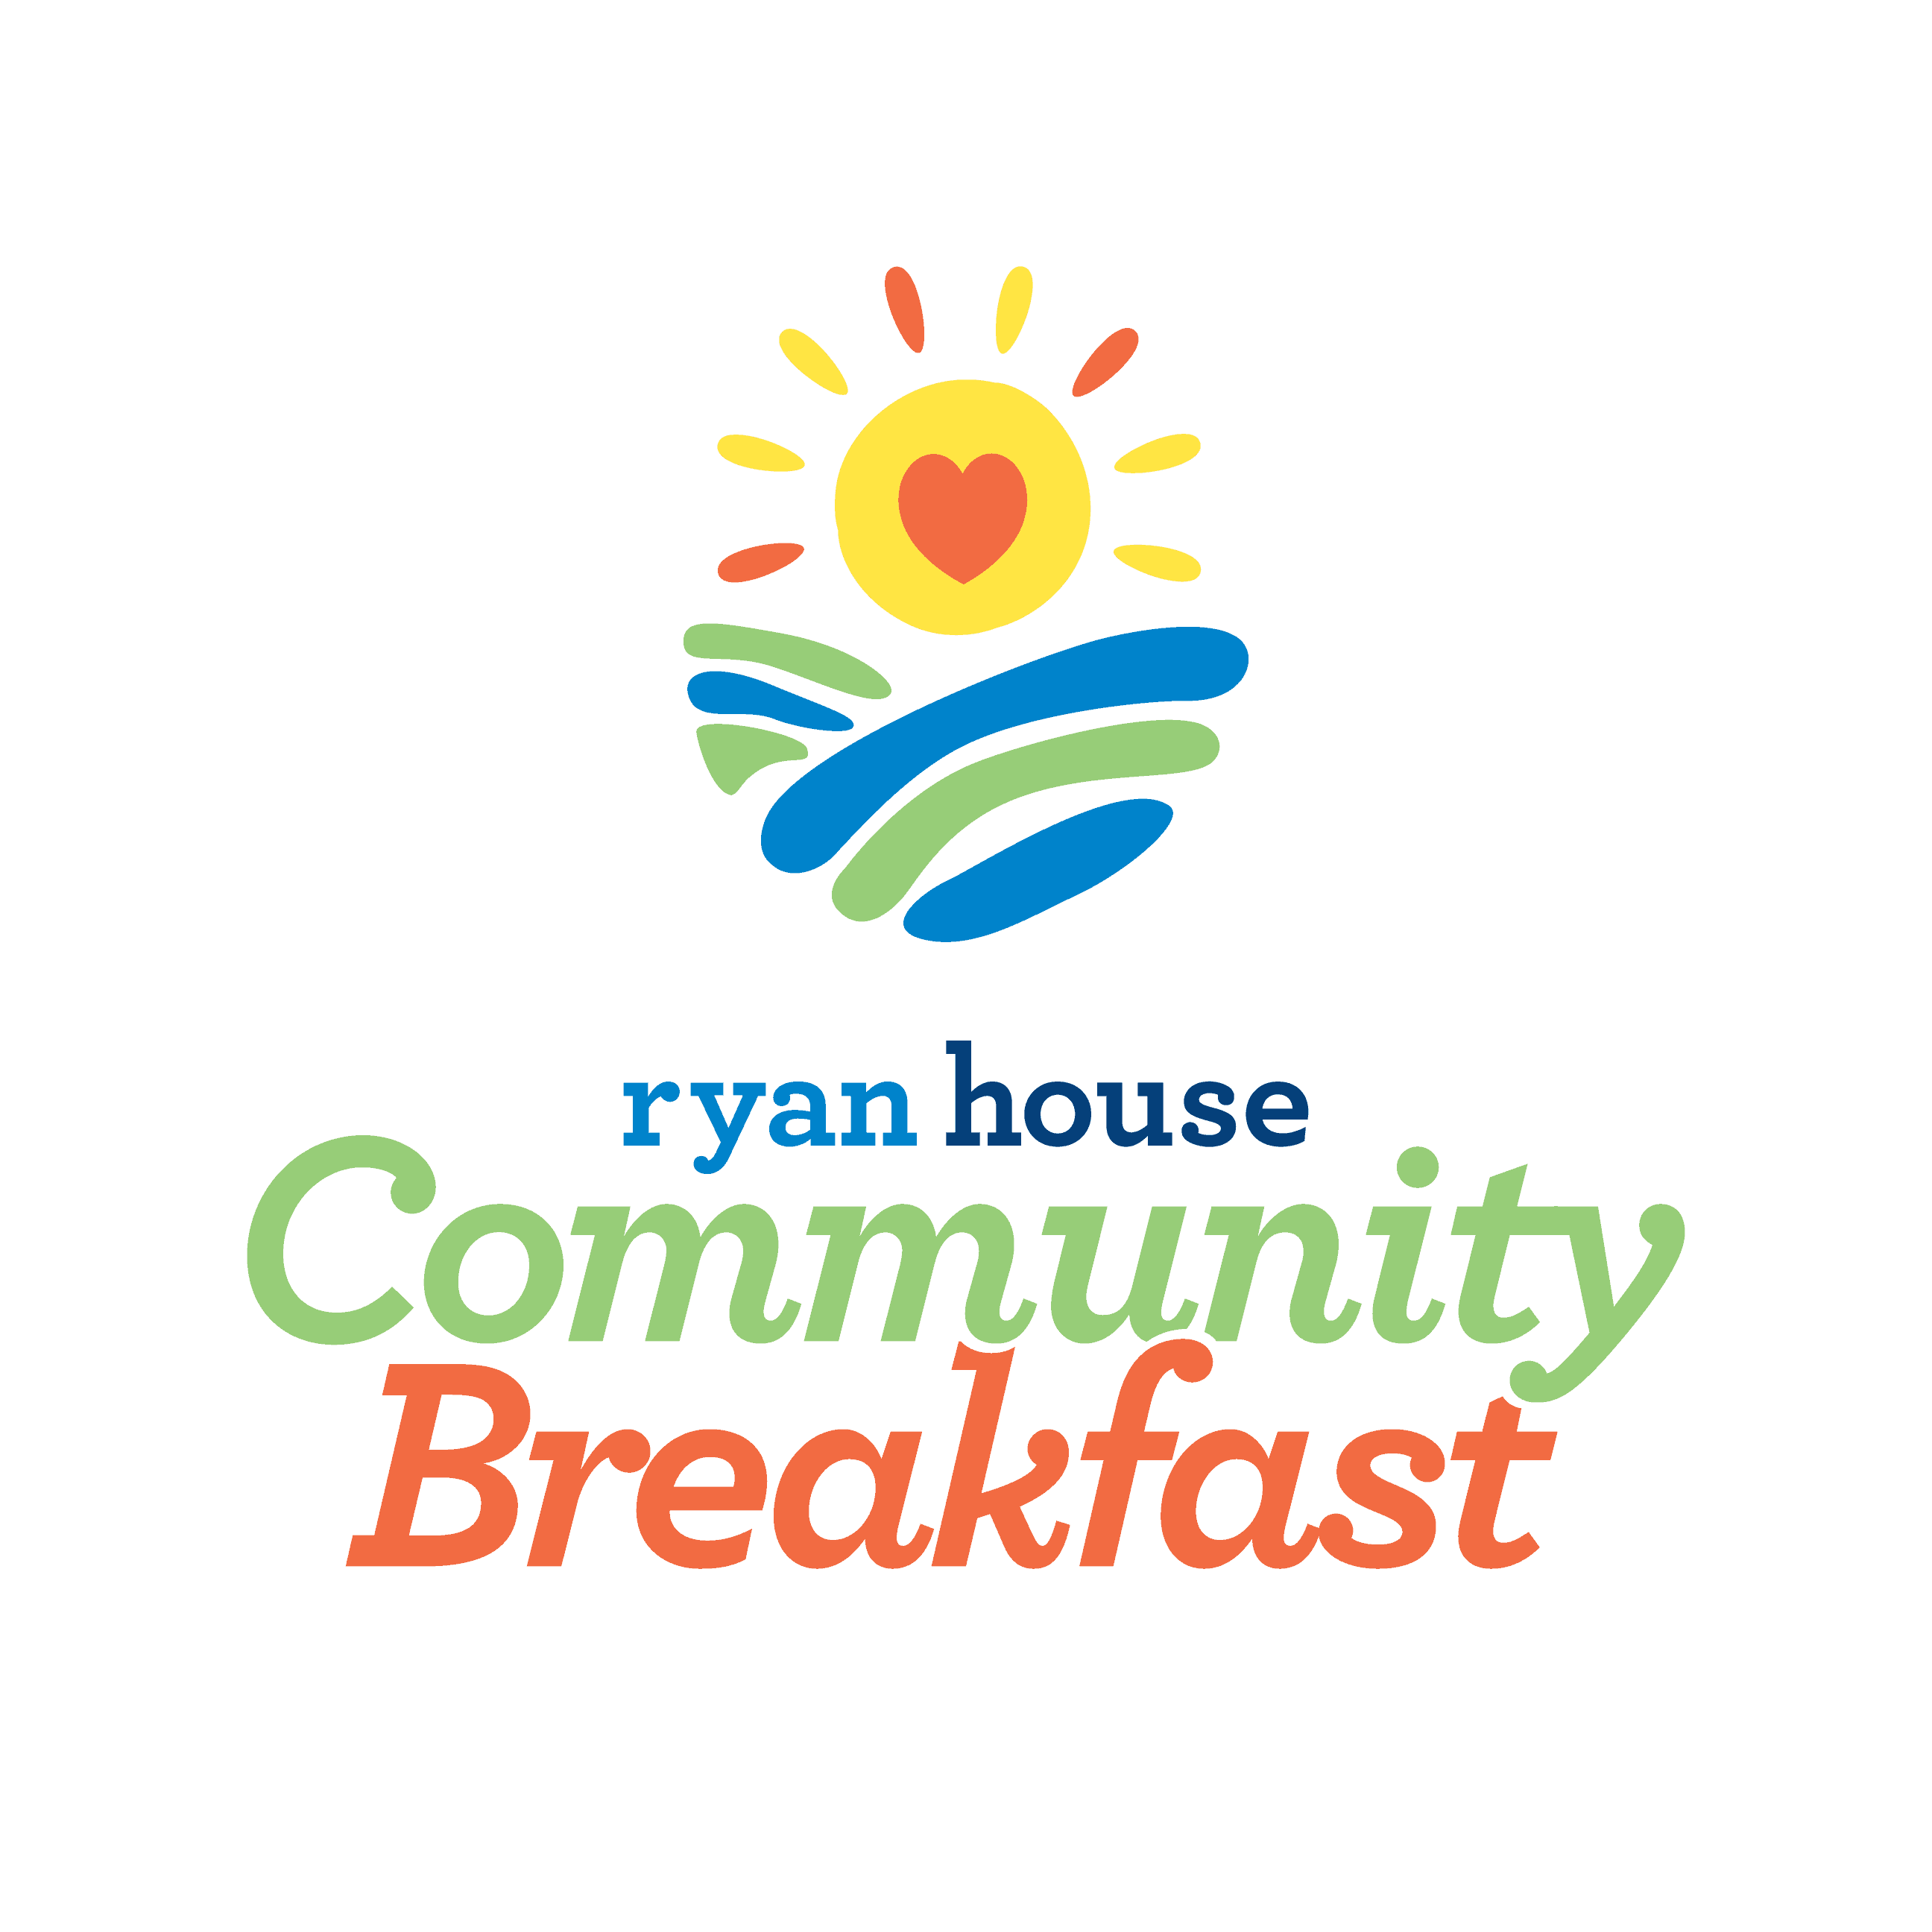 Mark Your Calendar for April 14 and Join Us in Person for Our Annual Community Breakfast!